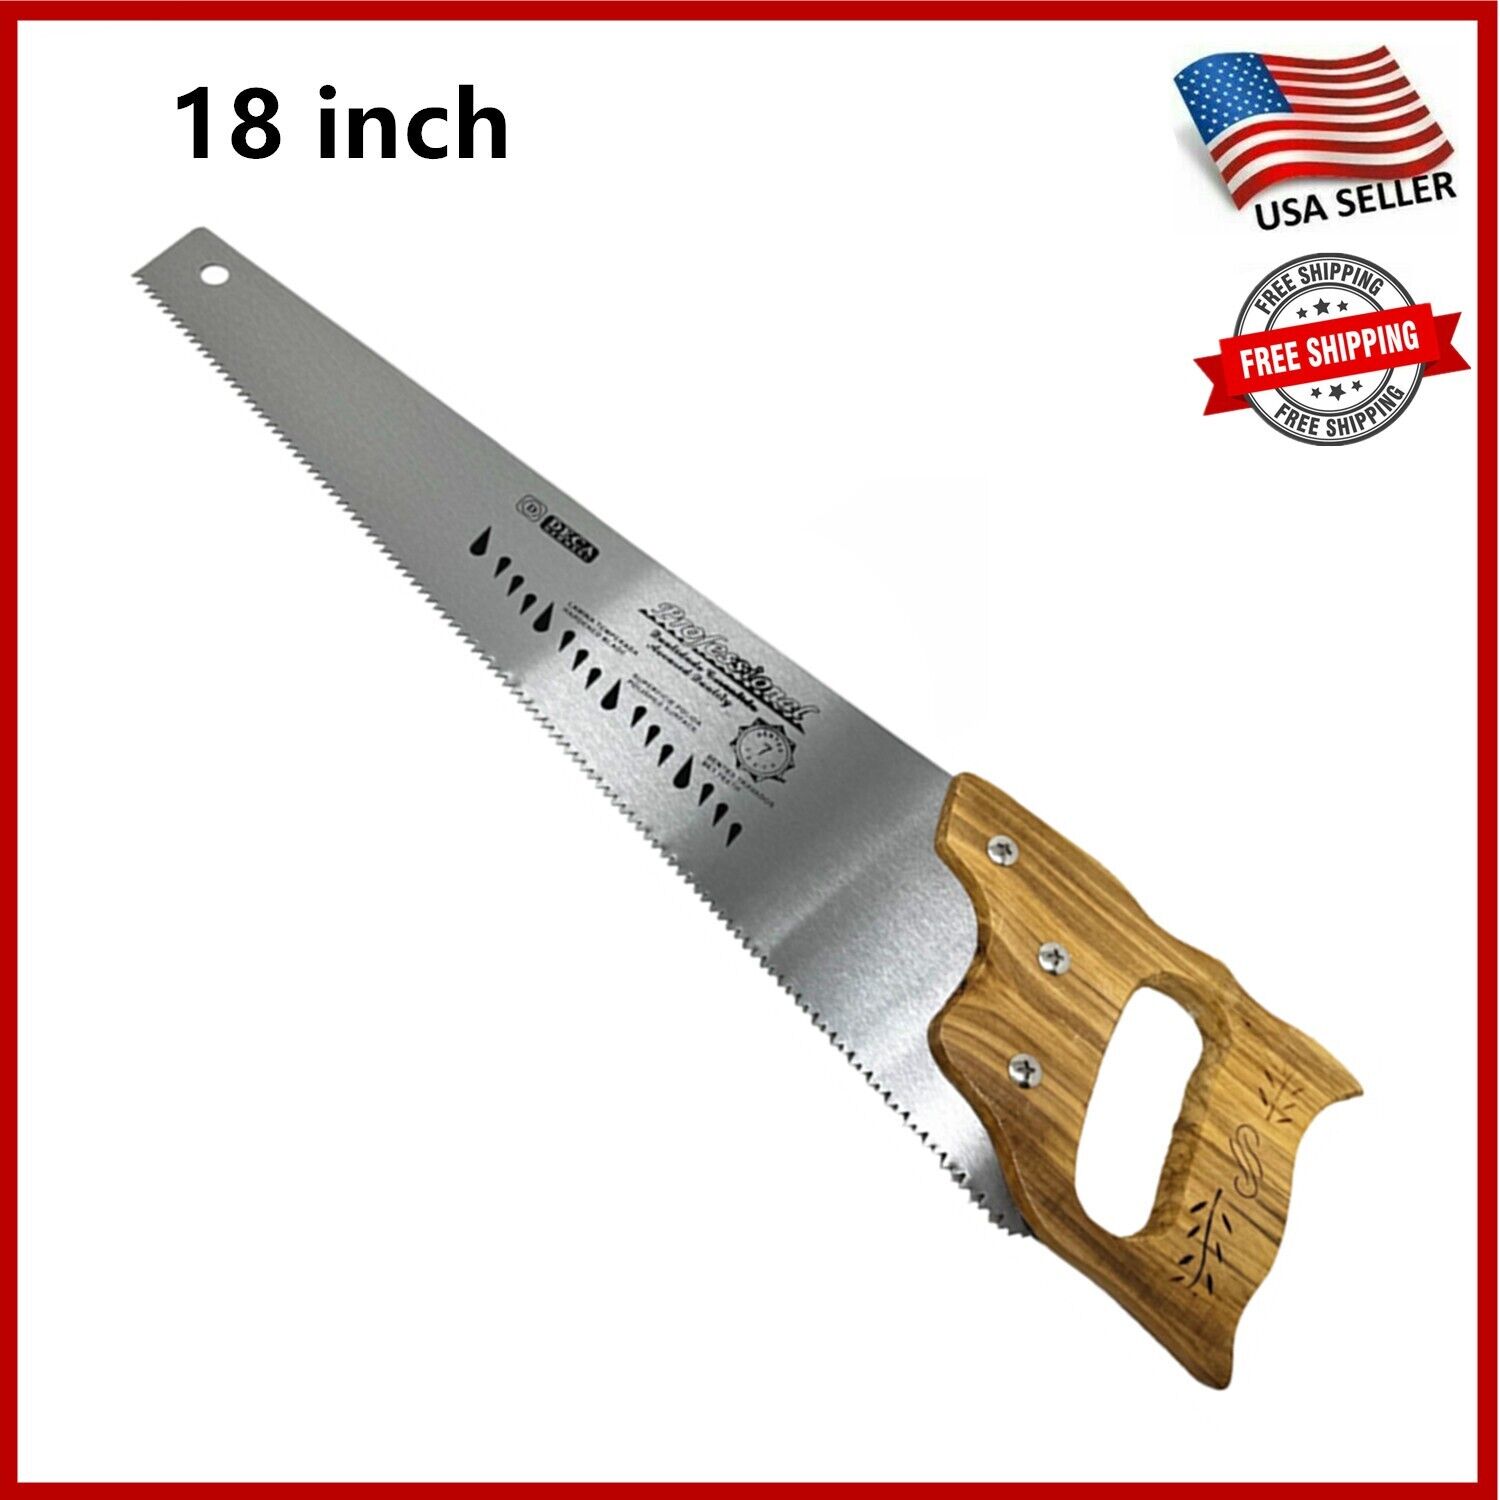 18 Inch Wood Hand Saw, 7 TPI Heavy Duty Wood Saw for Woodworking & Sawing